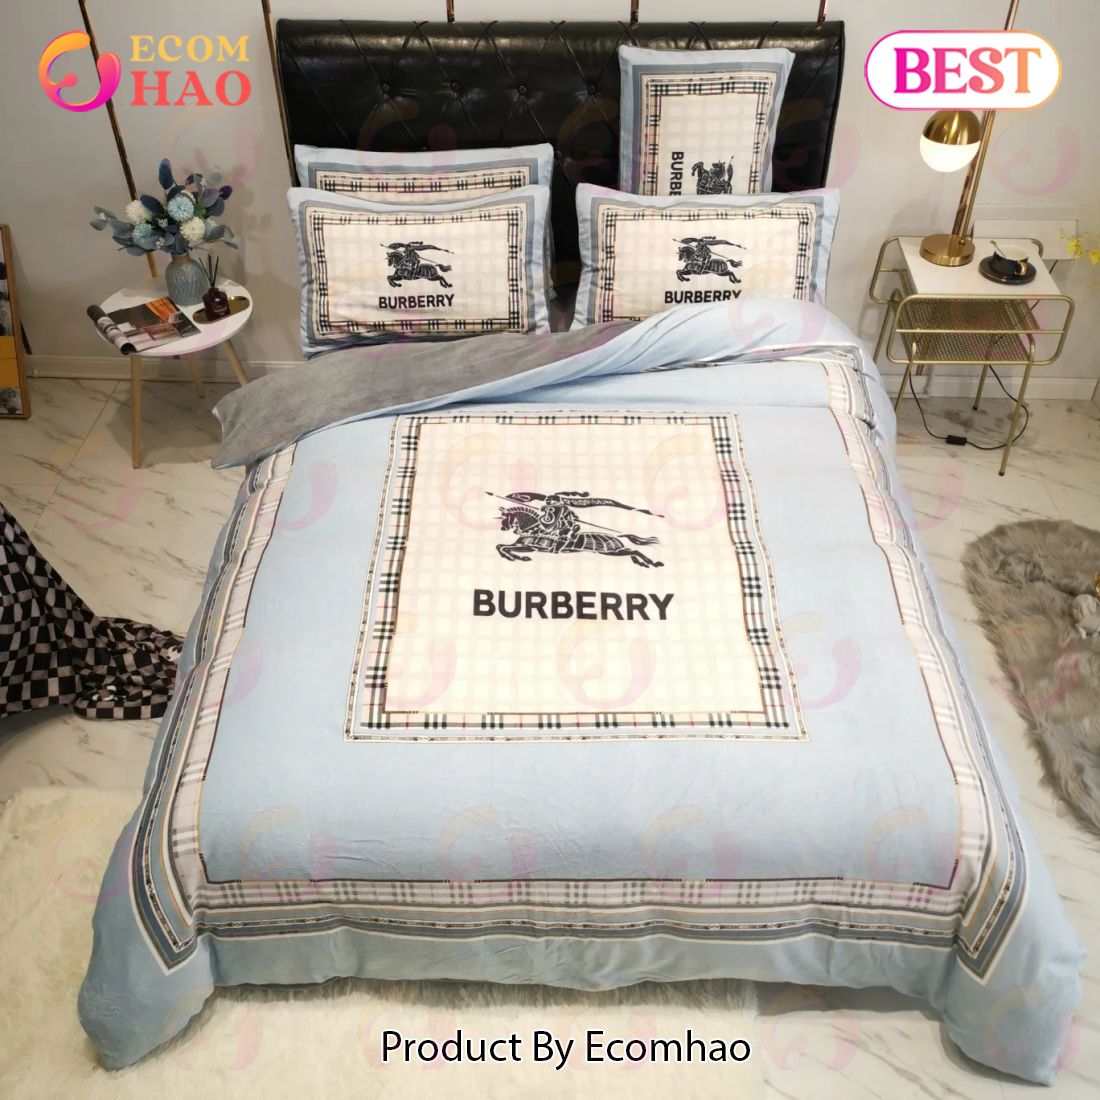 Burberry Bedding Sets 3D Printed Bedding Sets Quilt Sets Duvet Cover Luxury Brand Bedding Decor Bedroom Sets Best Luxury Bed Sets Gift Thankgivings And Christmas